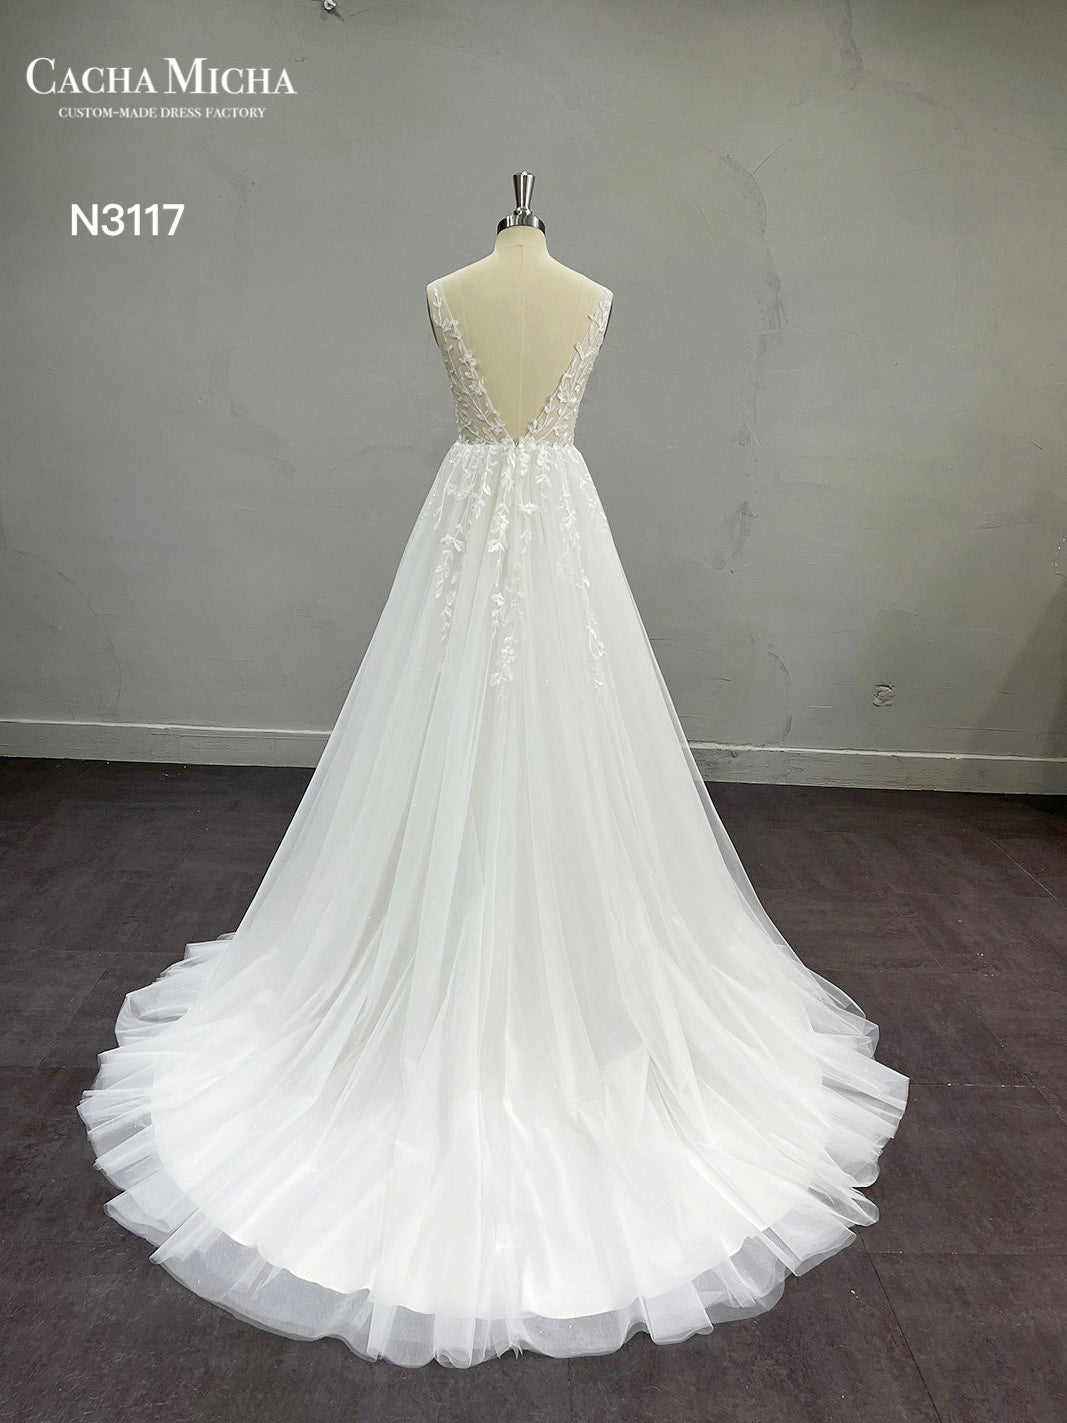 Affordable Soft Tulle with Lace A Line Wedding Dress N3117